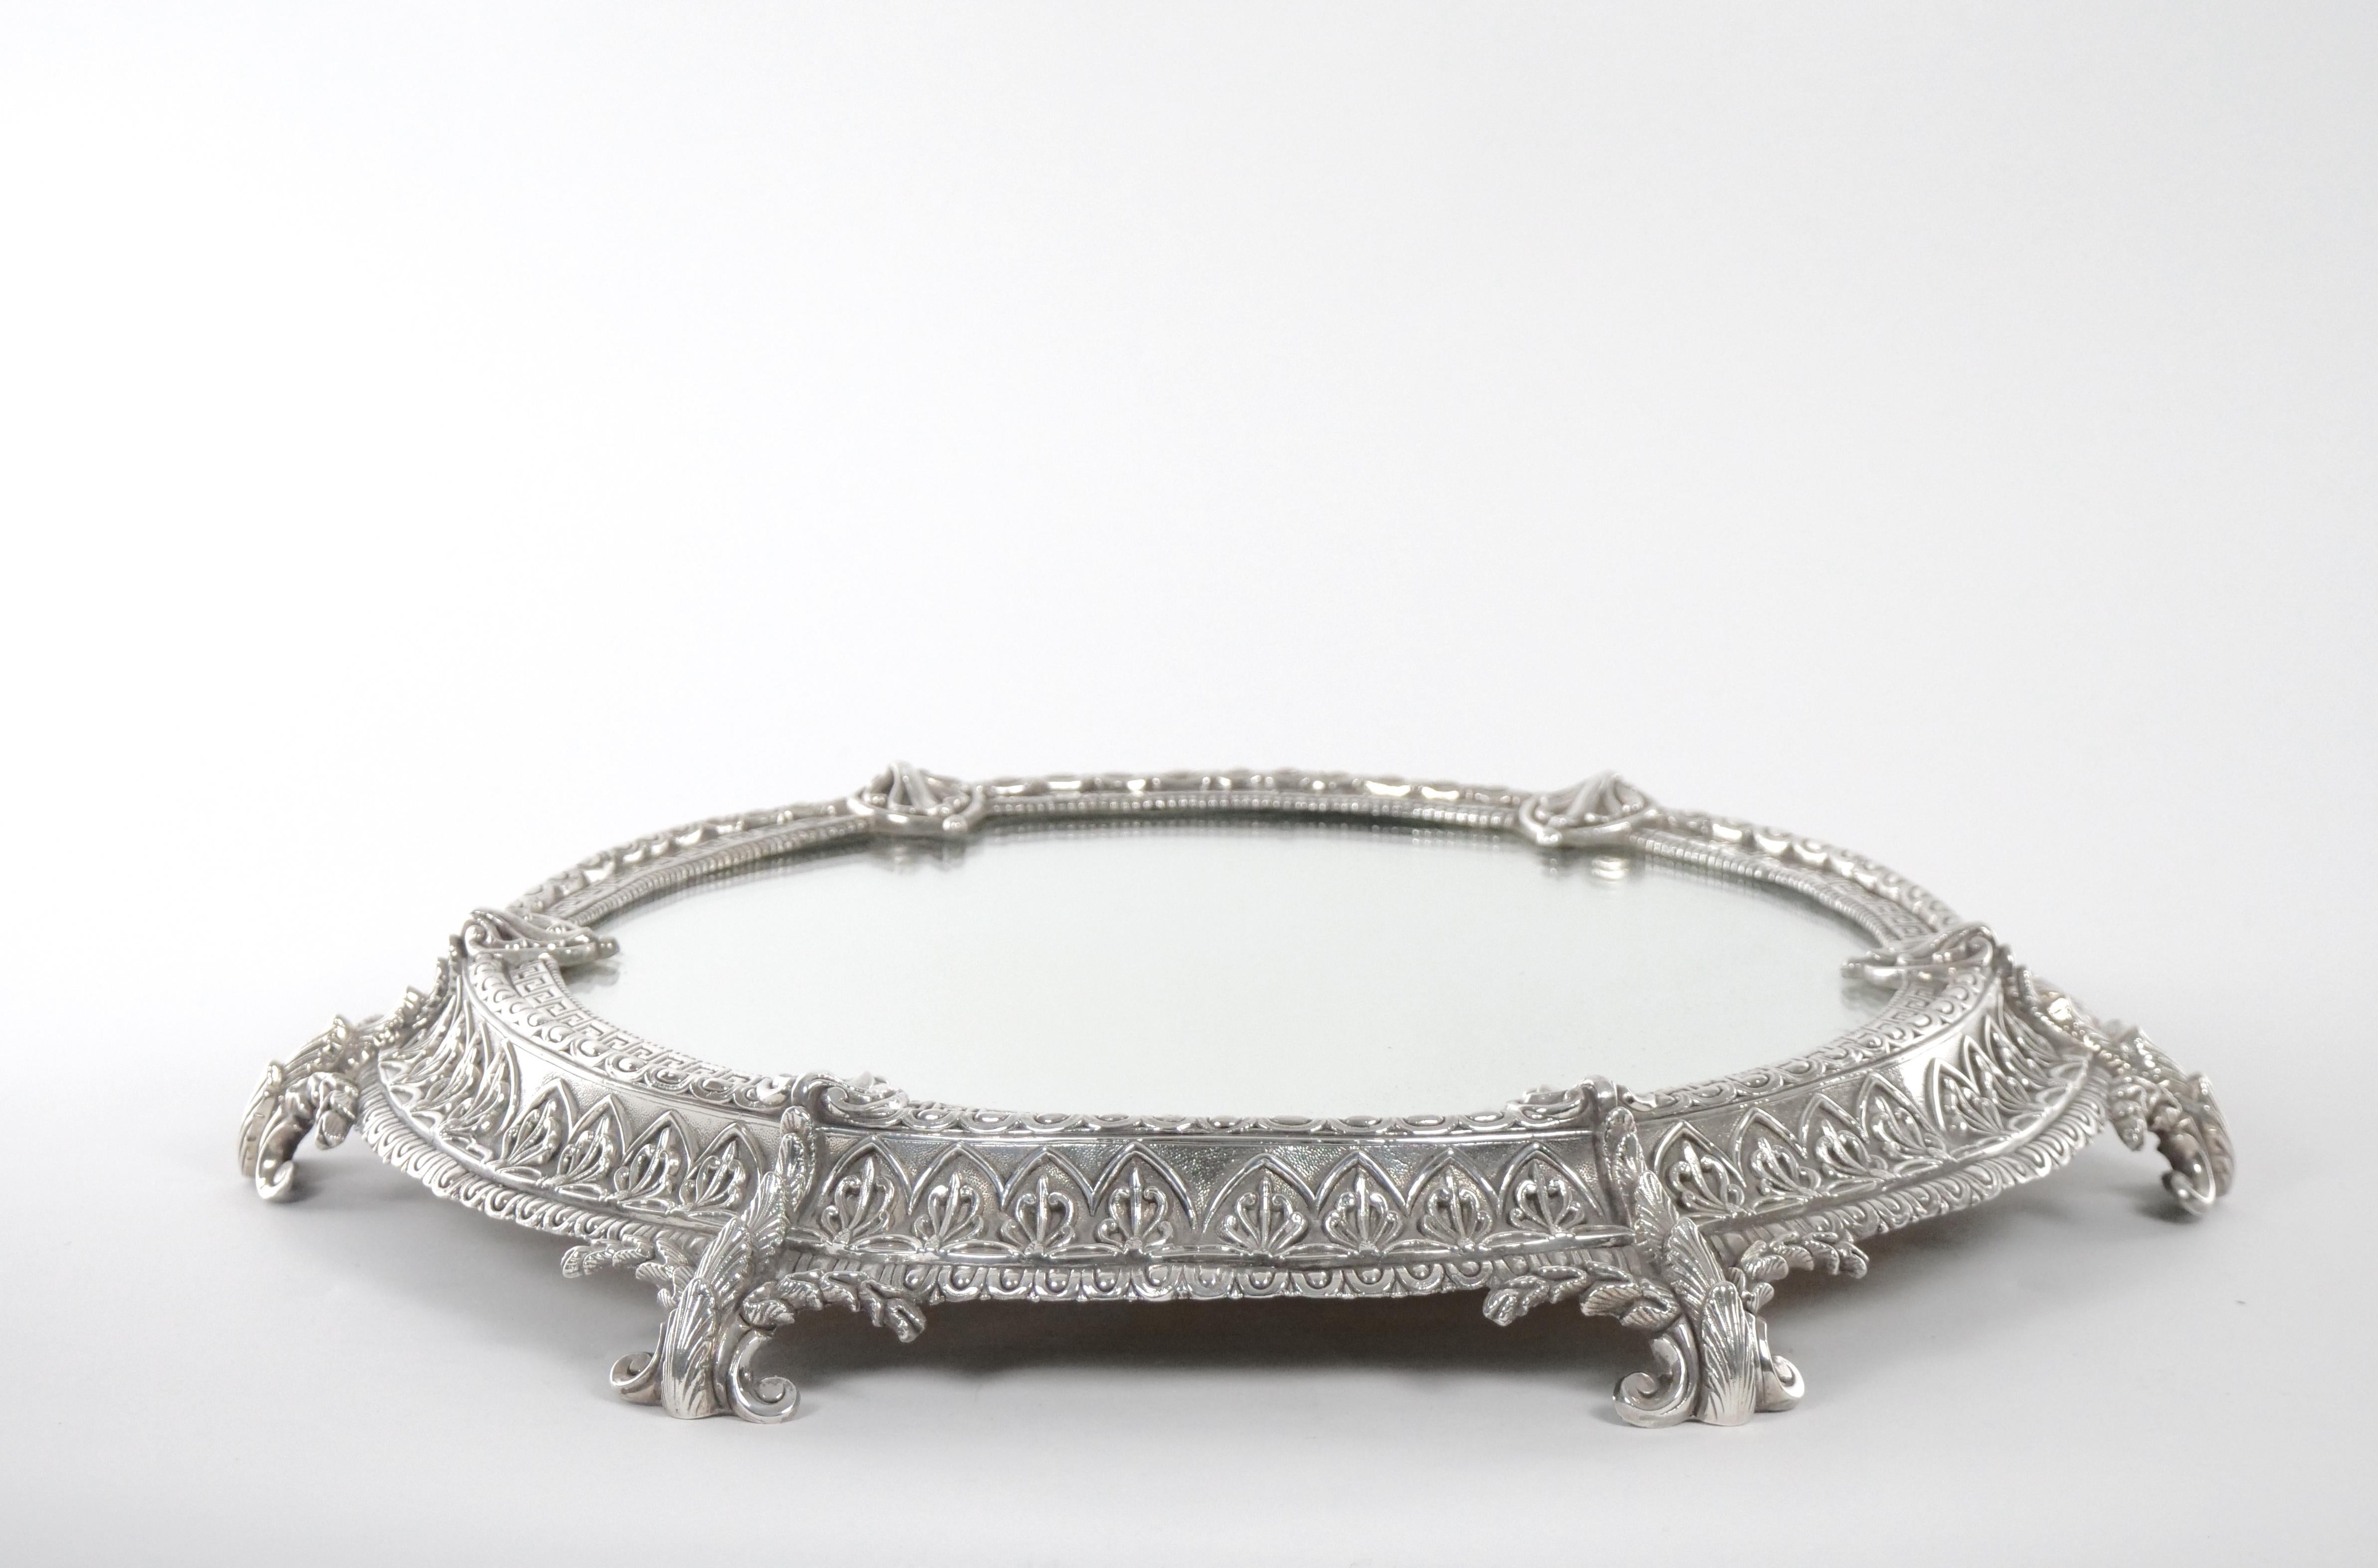 19th century French Rococo Revival silver plate oval shape footed centerpiece plateau. The plateau features a curvilinear cartouche with 6 leaf-mounted scroll supports. The plated frame is heavily decorated with a round trim interlace greek key,